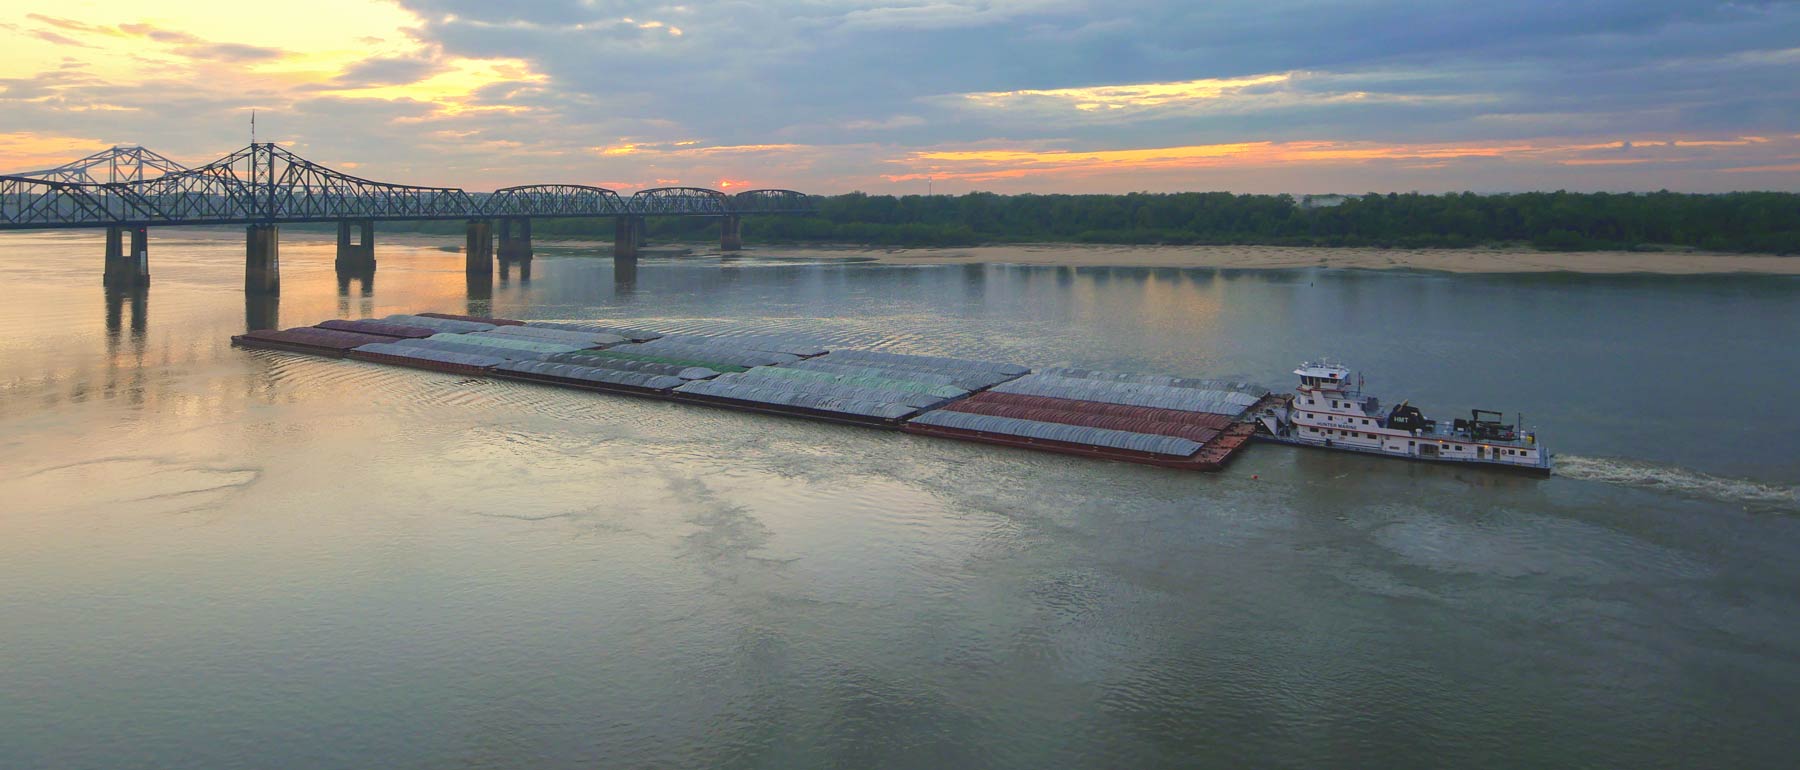 A towboat pushing loaded barges on the Lower Mississippi River